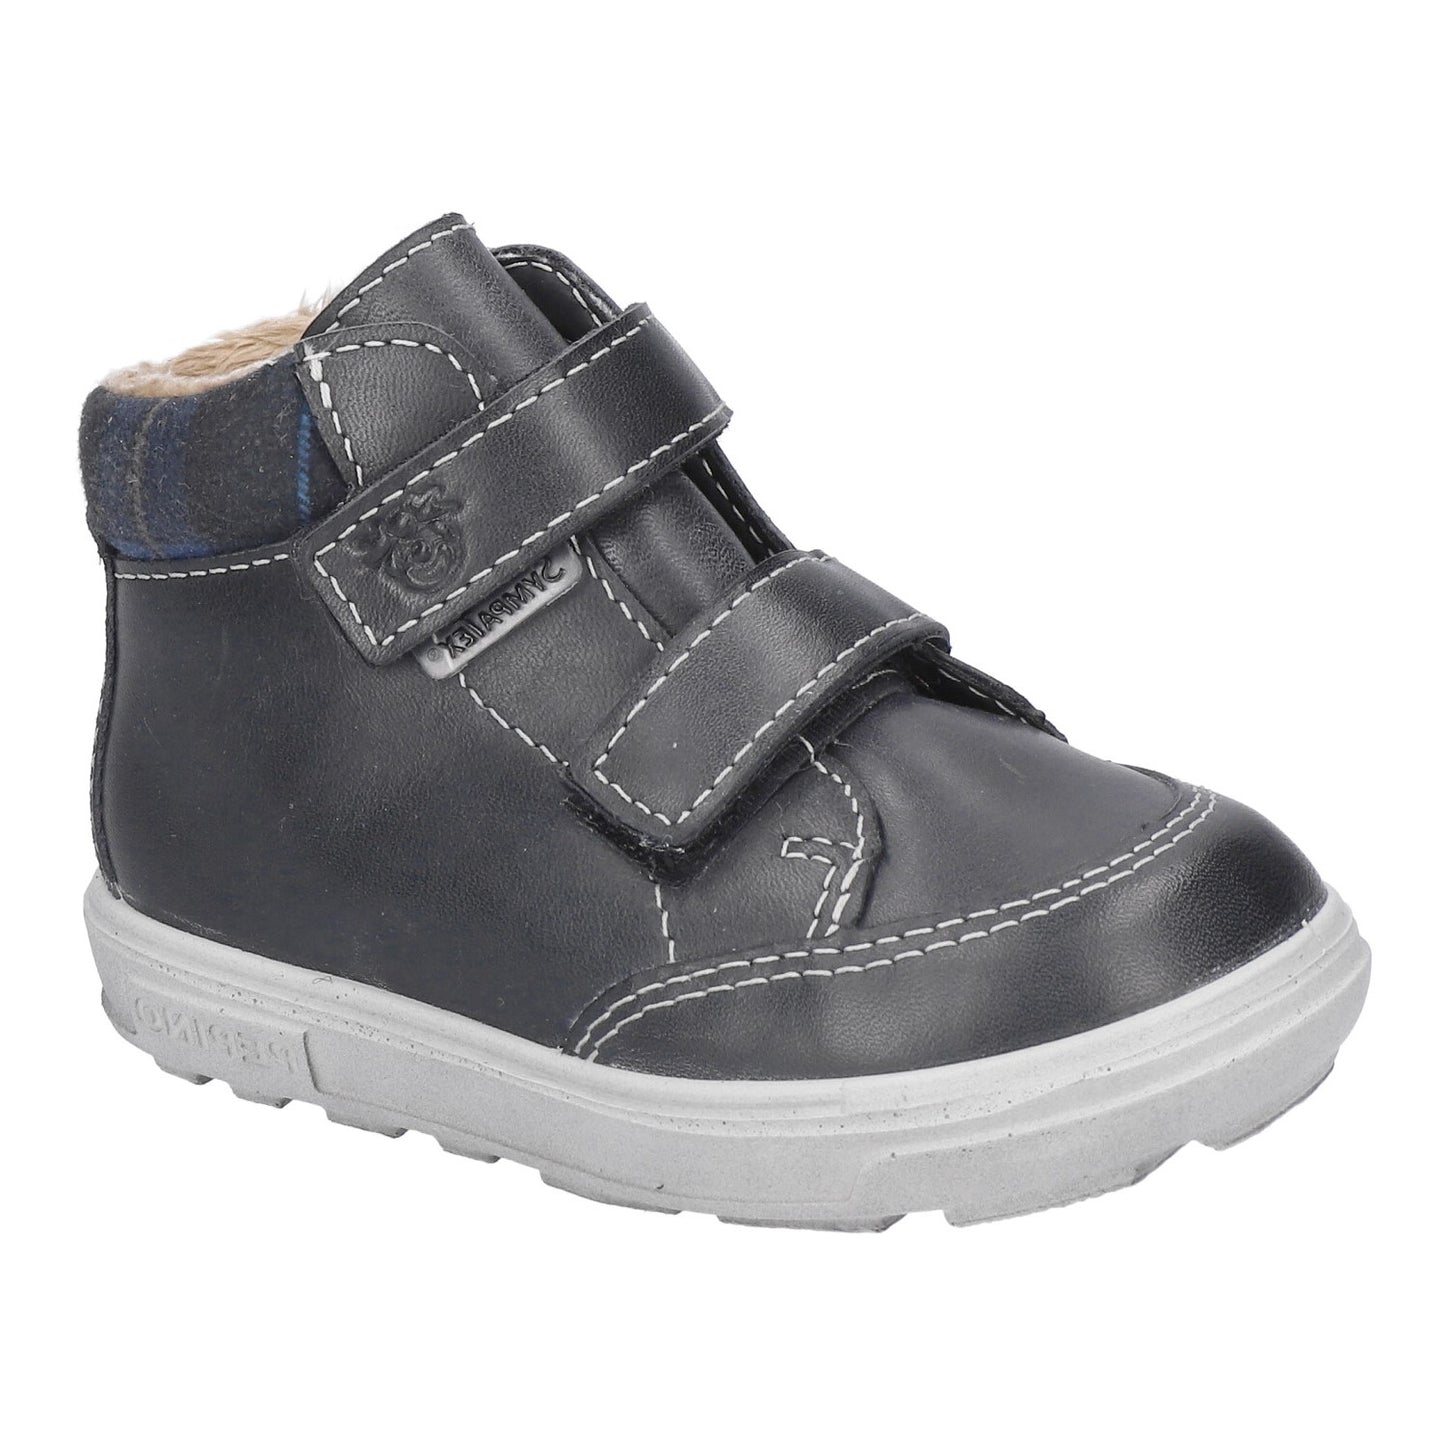 A boys waterproof ankle boot by Ricosta, style Basti, in navy leather with double velcro fastening. Right side view.